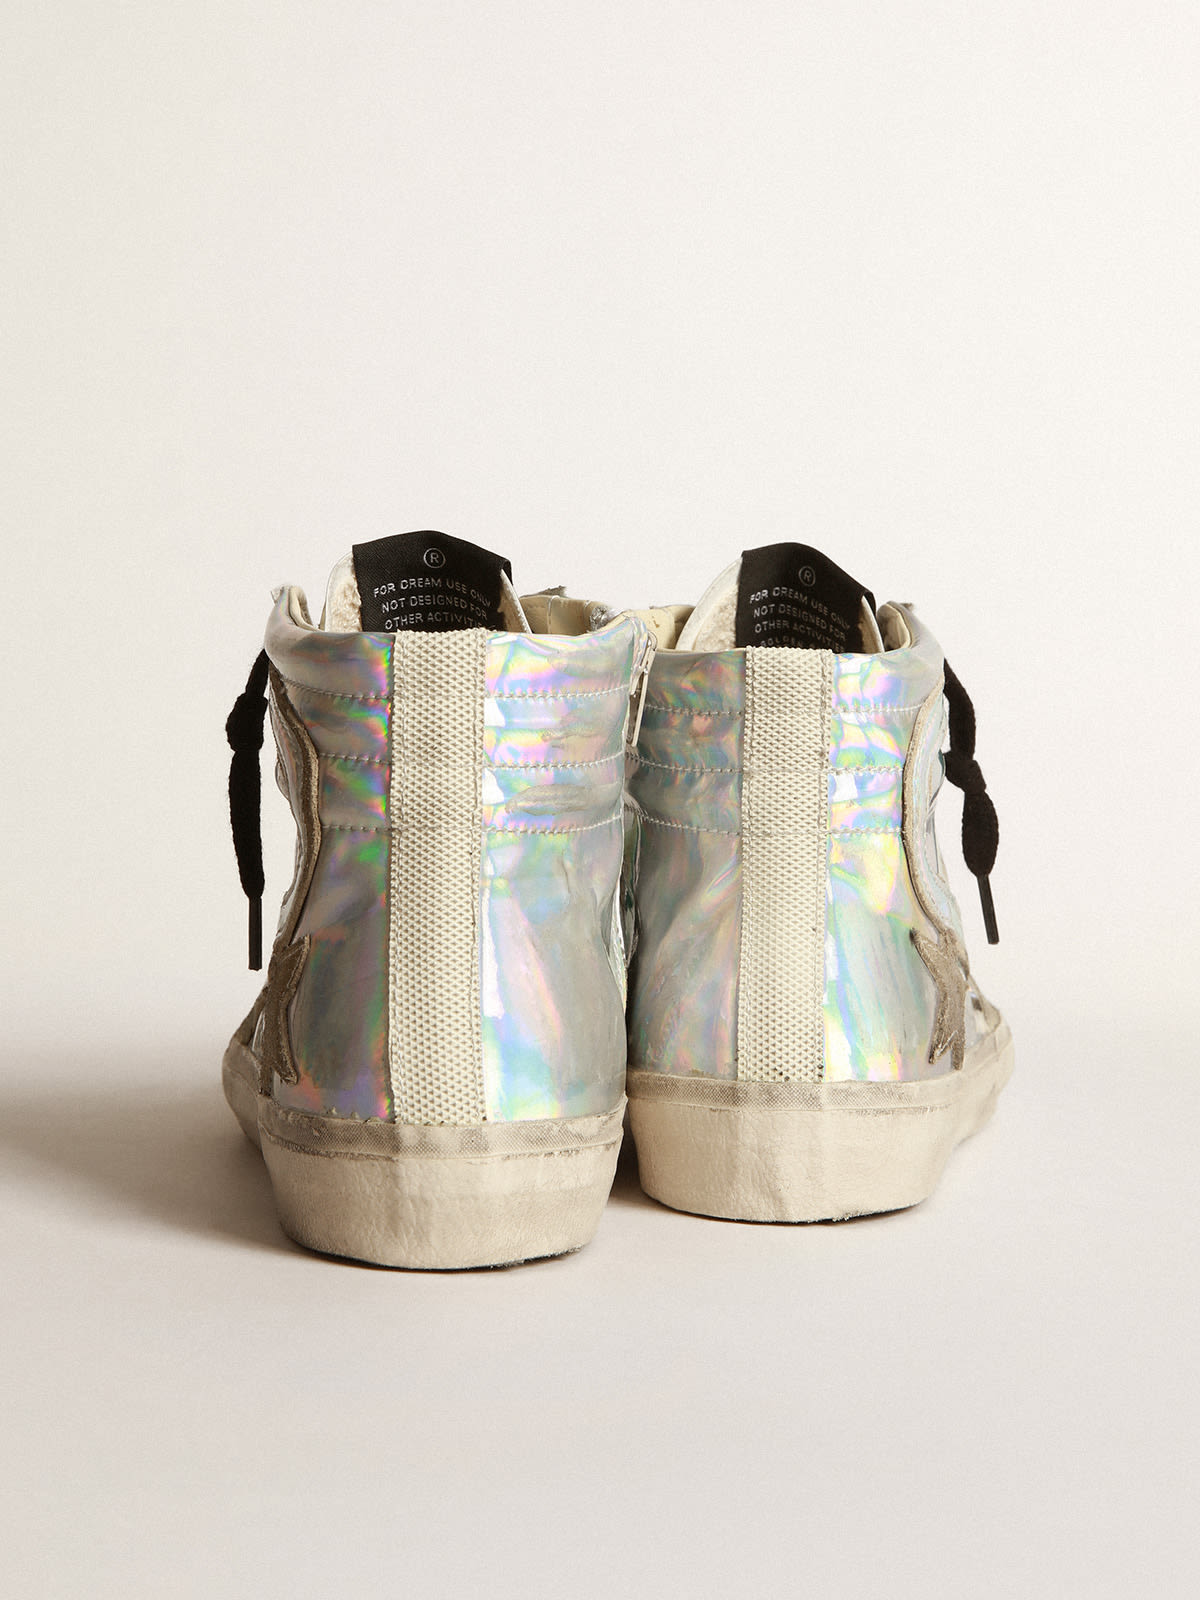 Golden Goose - Women’s Slide LAB in holographic-effect fabric in 